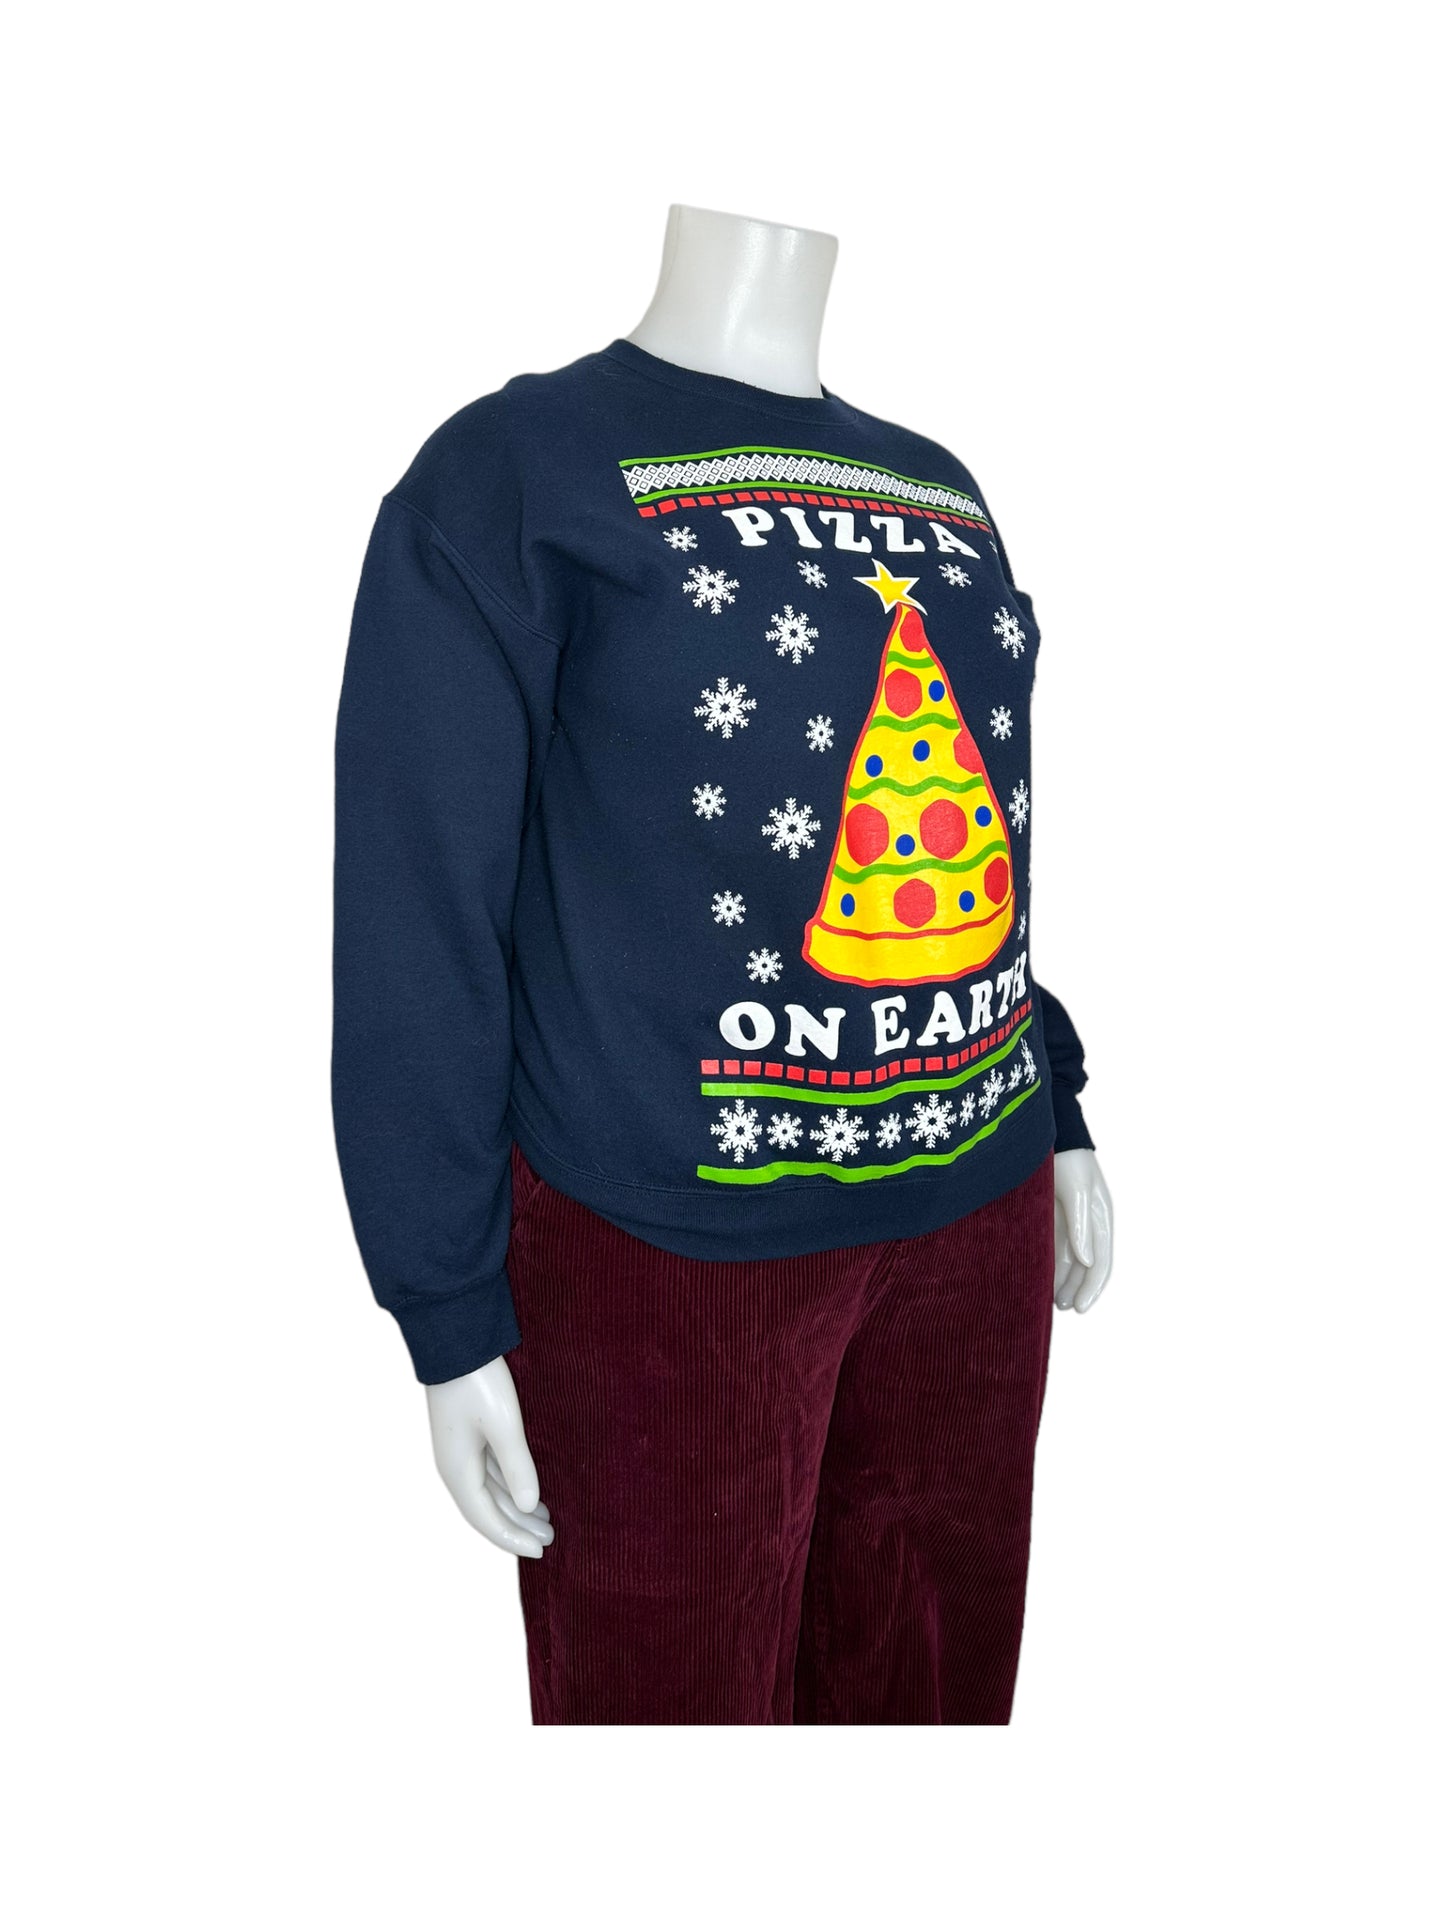 Navy Blue “Pizza On Earth” Graphic Ugly Christmas Crewneck